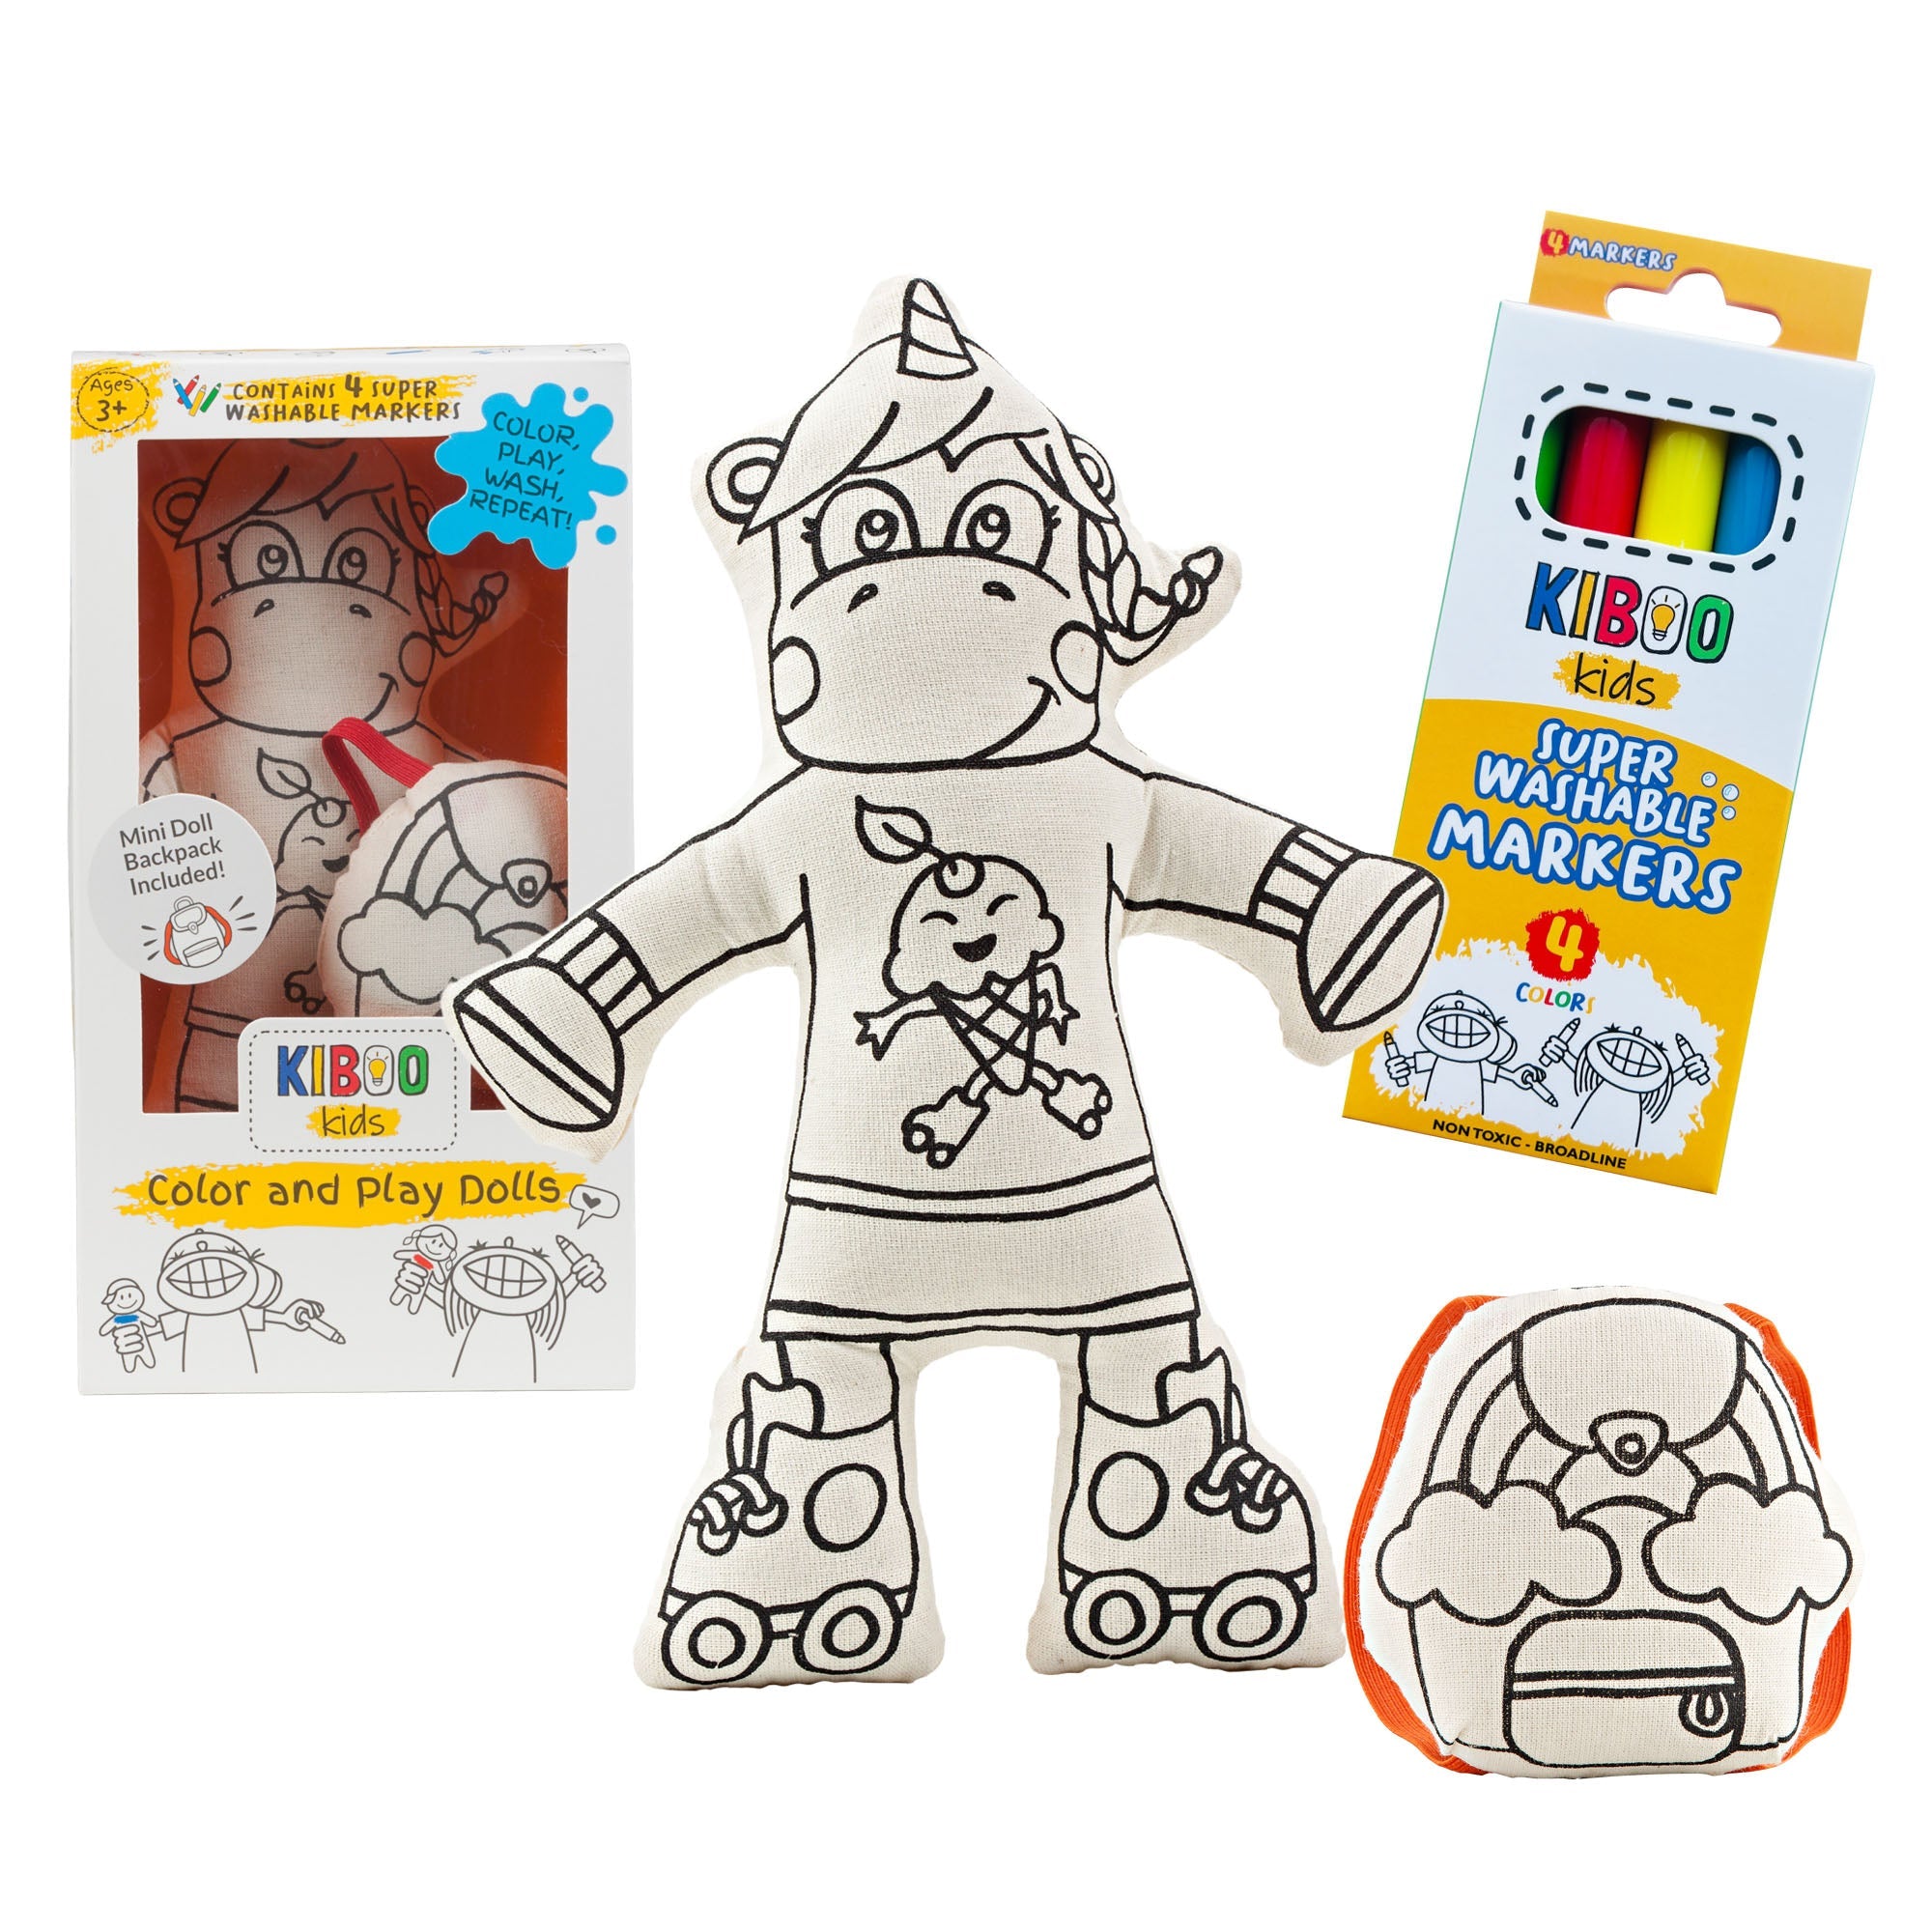 Kiboo Kids: Unicorn With Mini Rainbow Backpack - Colorable And Washable Doll For Creative Play